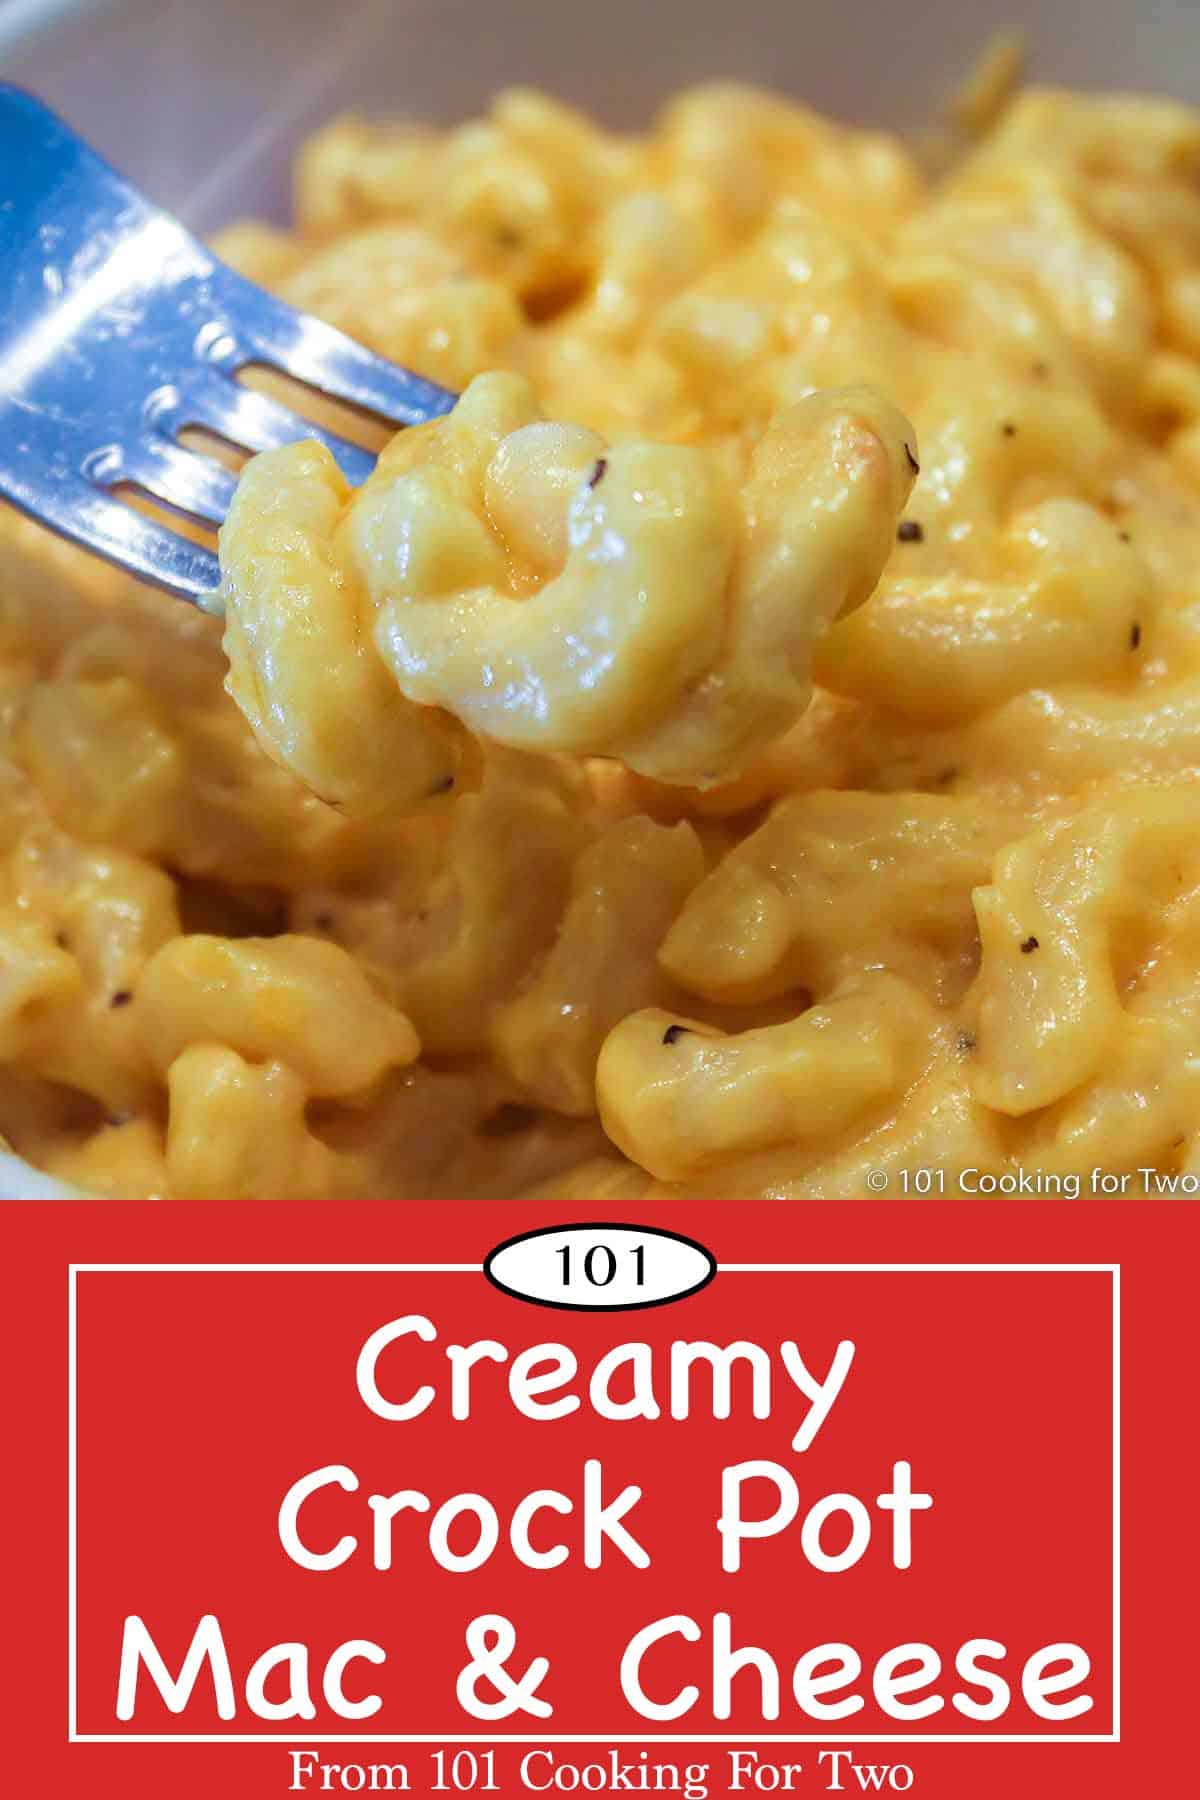 Creamy Crock Pot Mac and Cheese - 101 Cooking For Two